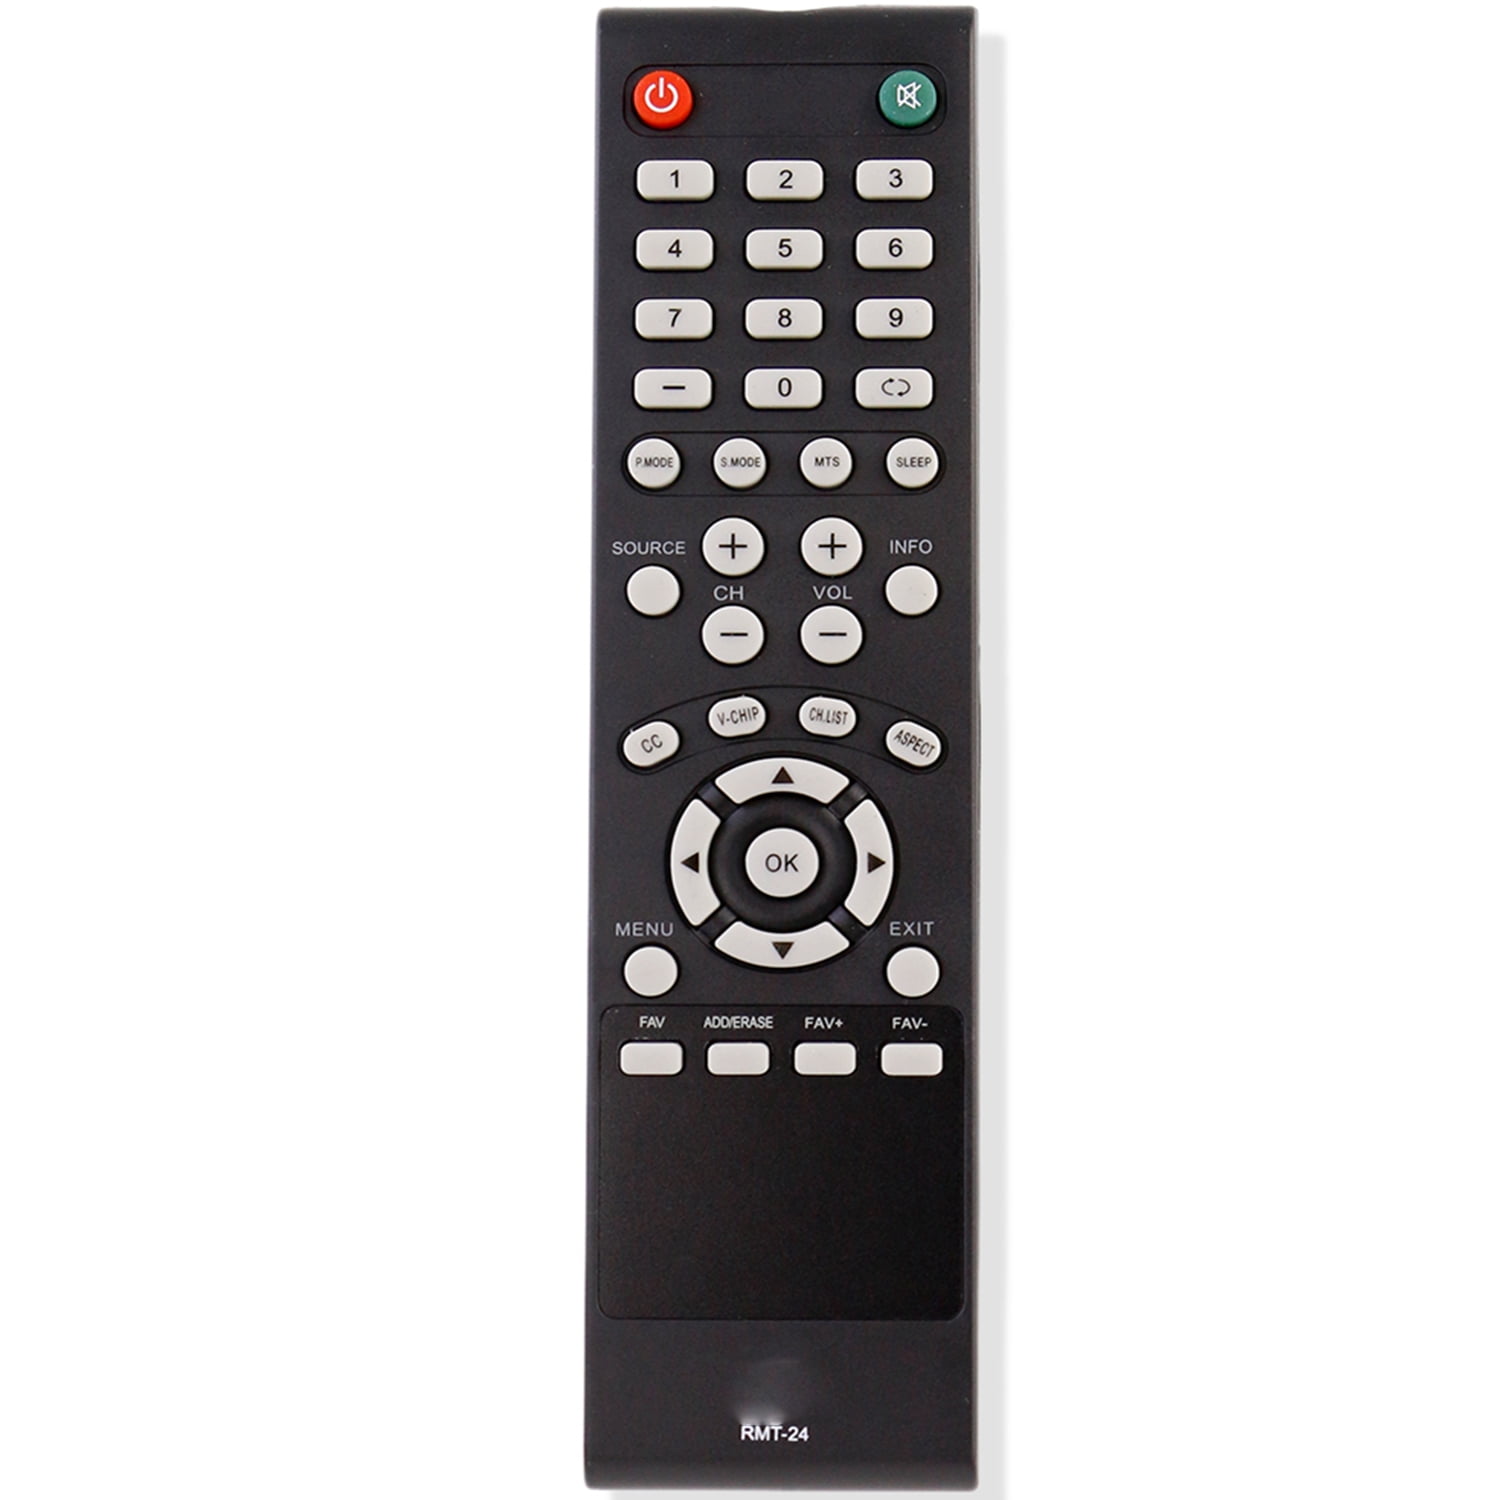 WE55UC4200 WD55UT4490 WD50UT4490 Part No: 845-058-03B00 Westinghouse LCD TV Remote Control for Models WD65NC4190 WD42UT4490 WD55UB4530 